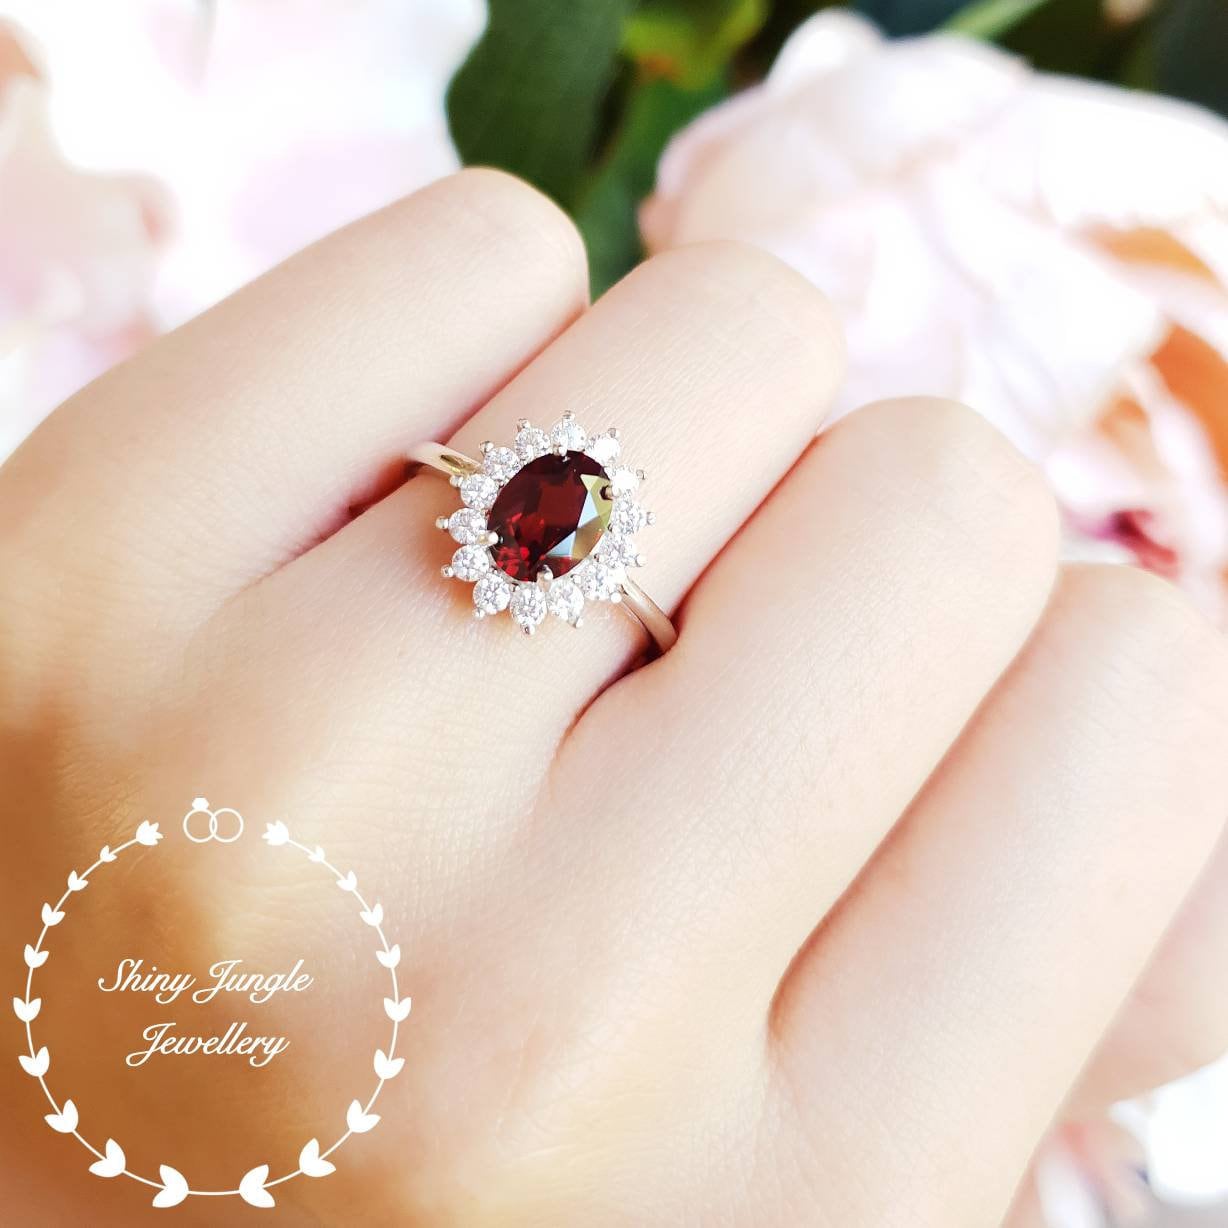 Details about   1.75 Round Halo 3stone Real Red Garnet Promise Bridal Wedding Ring 14k Rose Gold 